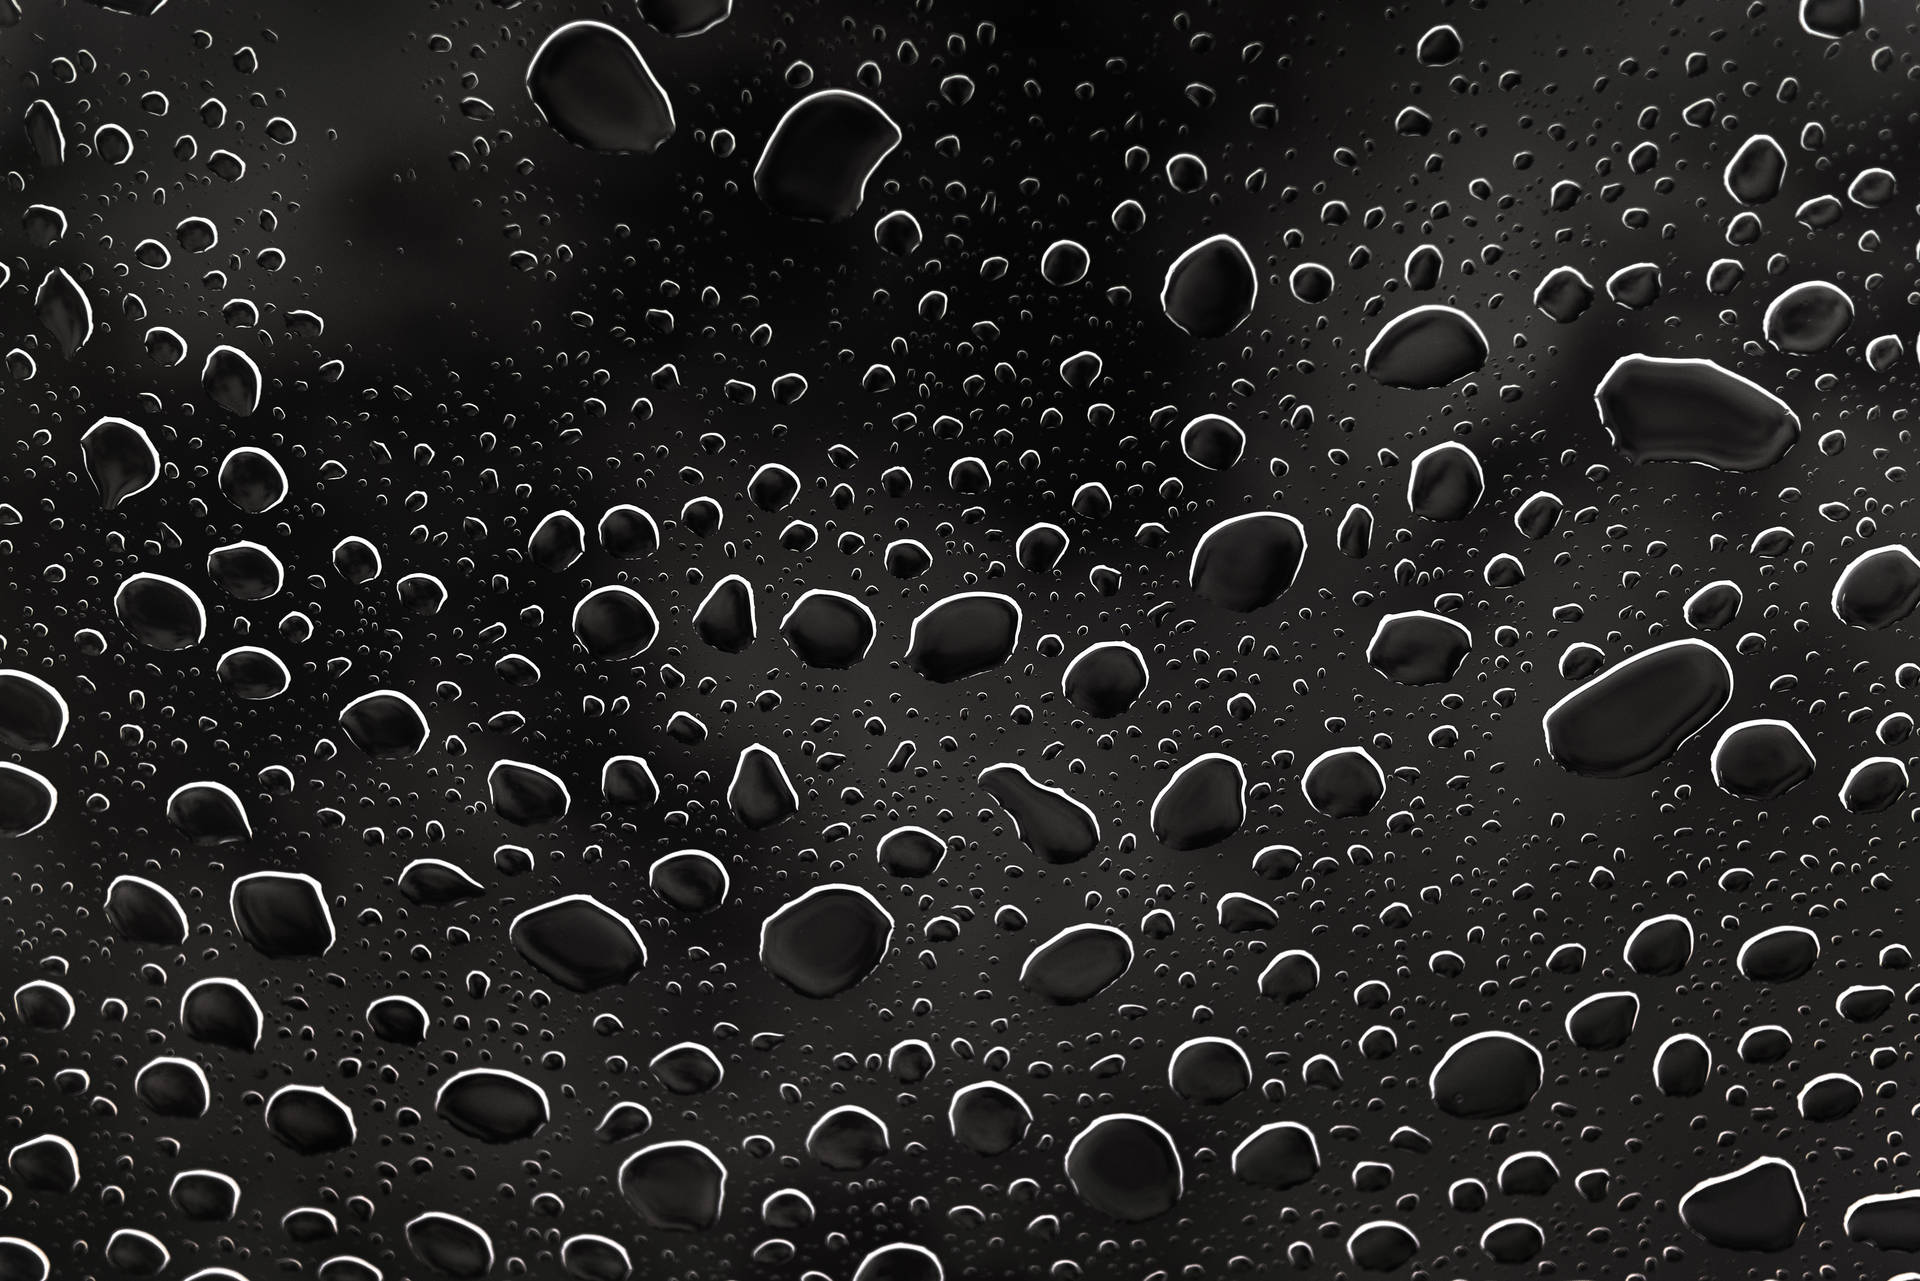 Black And White Hd Water Droplets Background